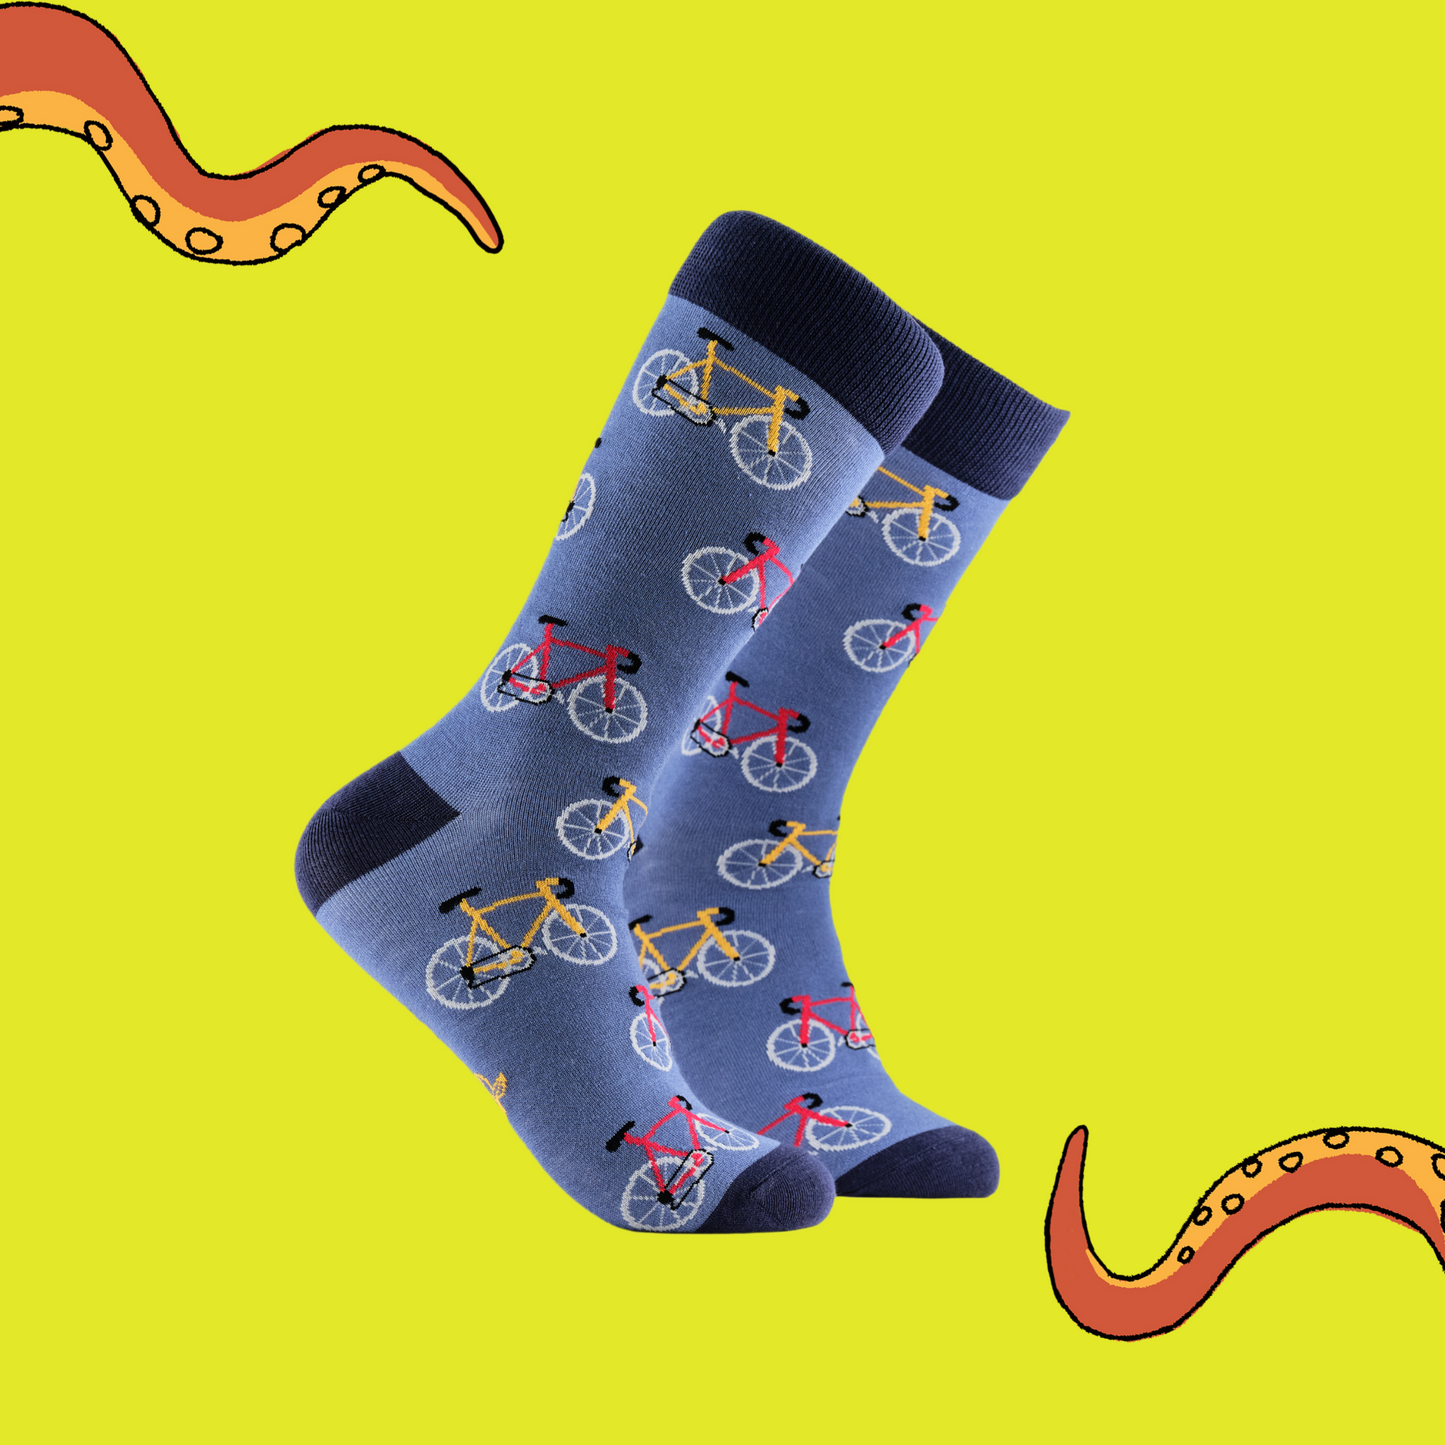 A pair of socks depicting red and yellow bikes. Blue legs, dark blue cuff, heel and toe.